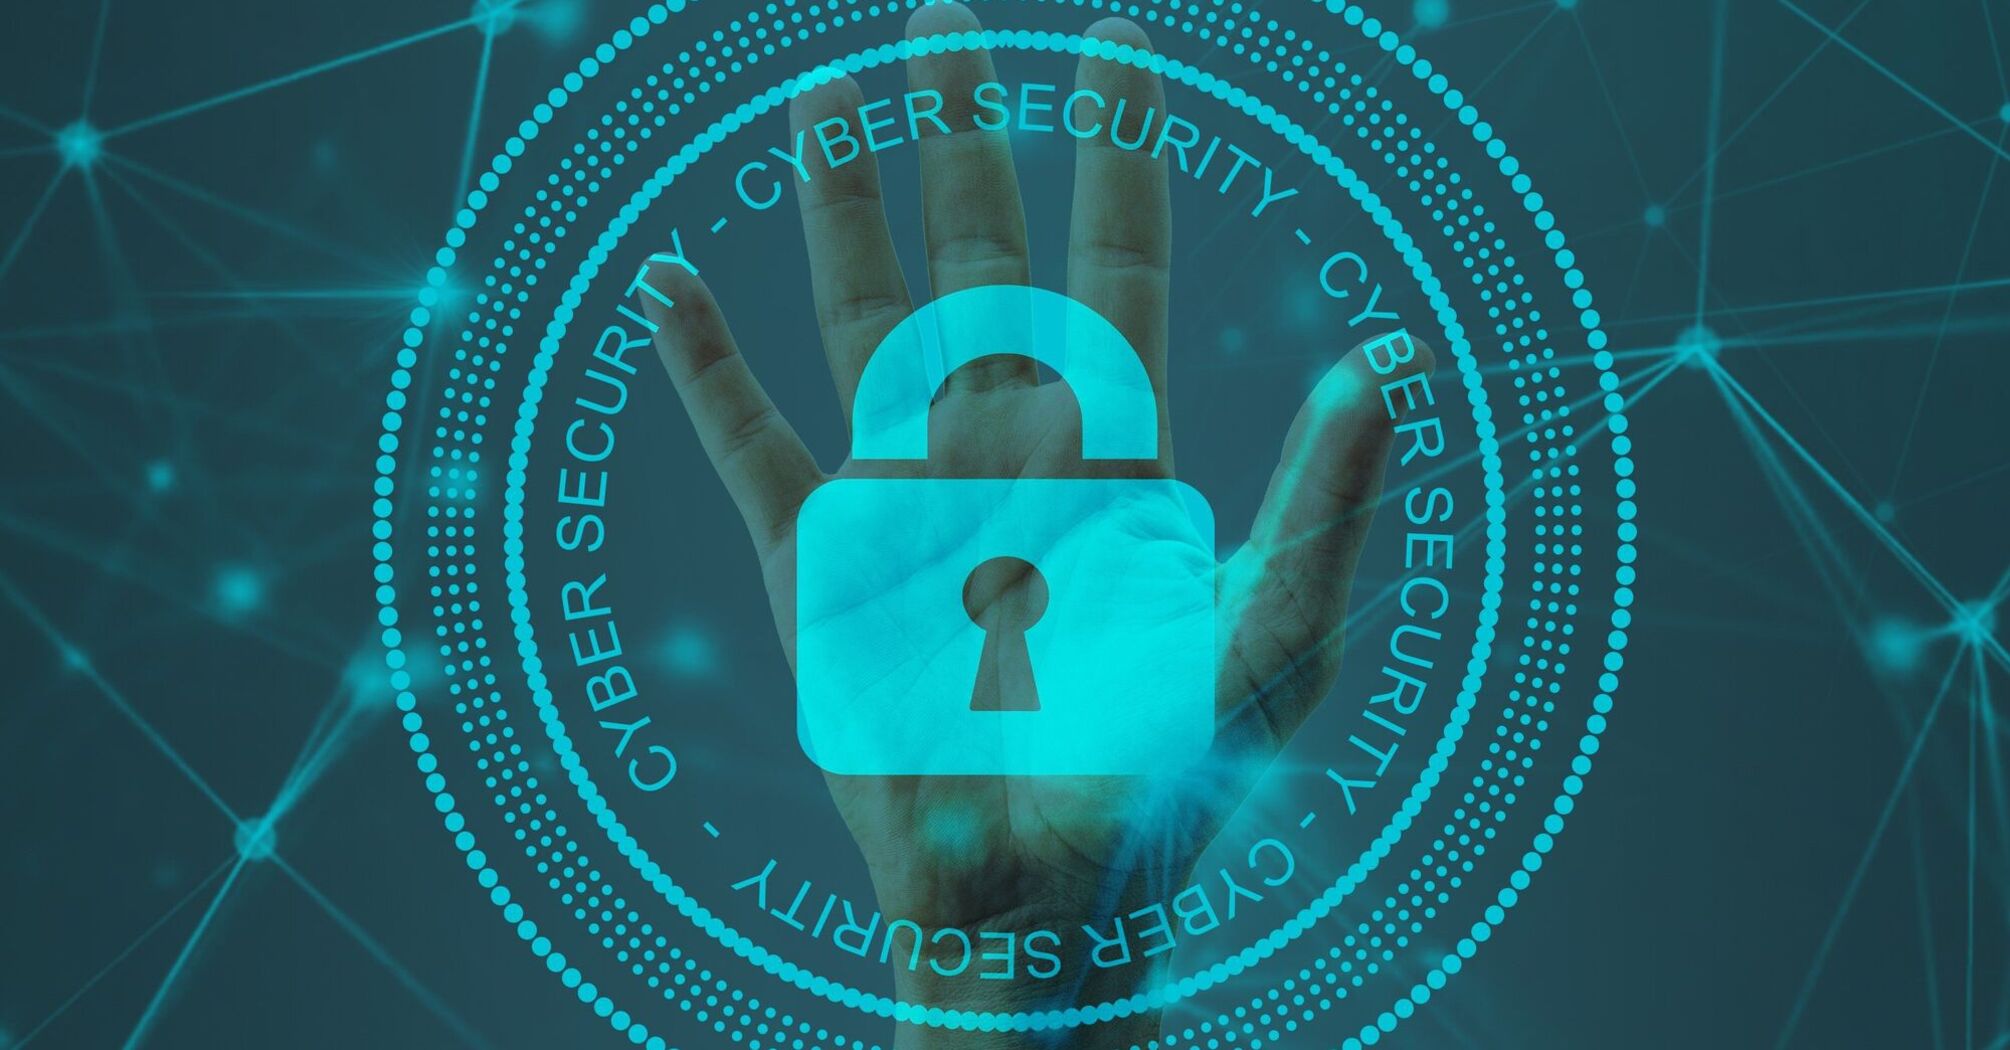 A graphic representation of cybersecurity, featuring a hand symbolizing protection within a digital network, encircled by layers of security symbols and cyber terminology